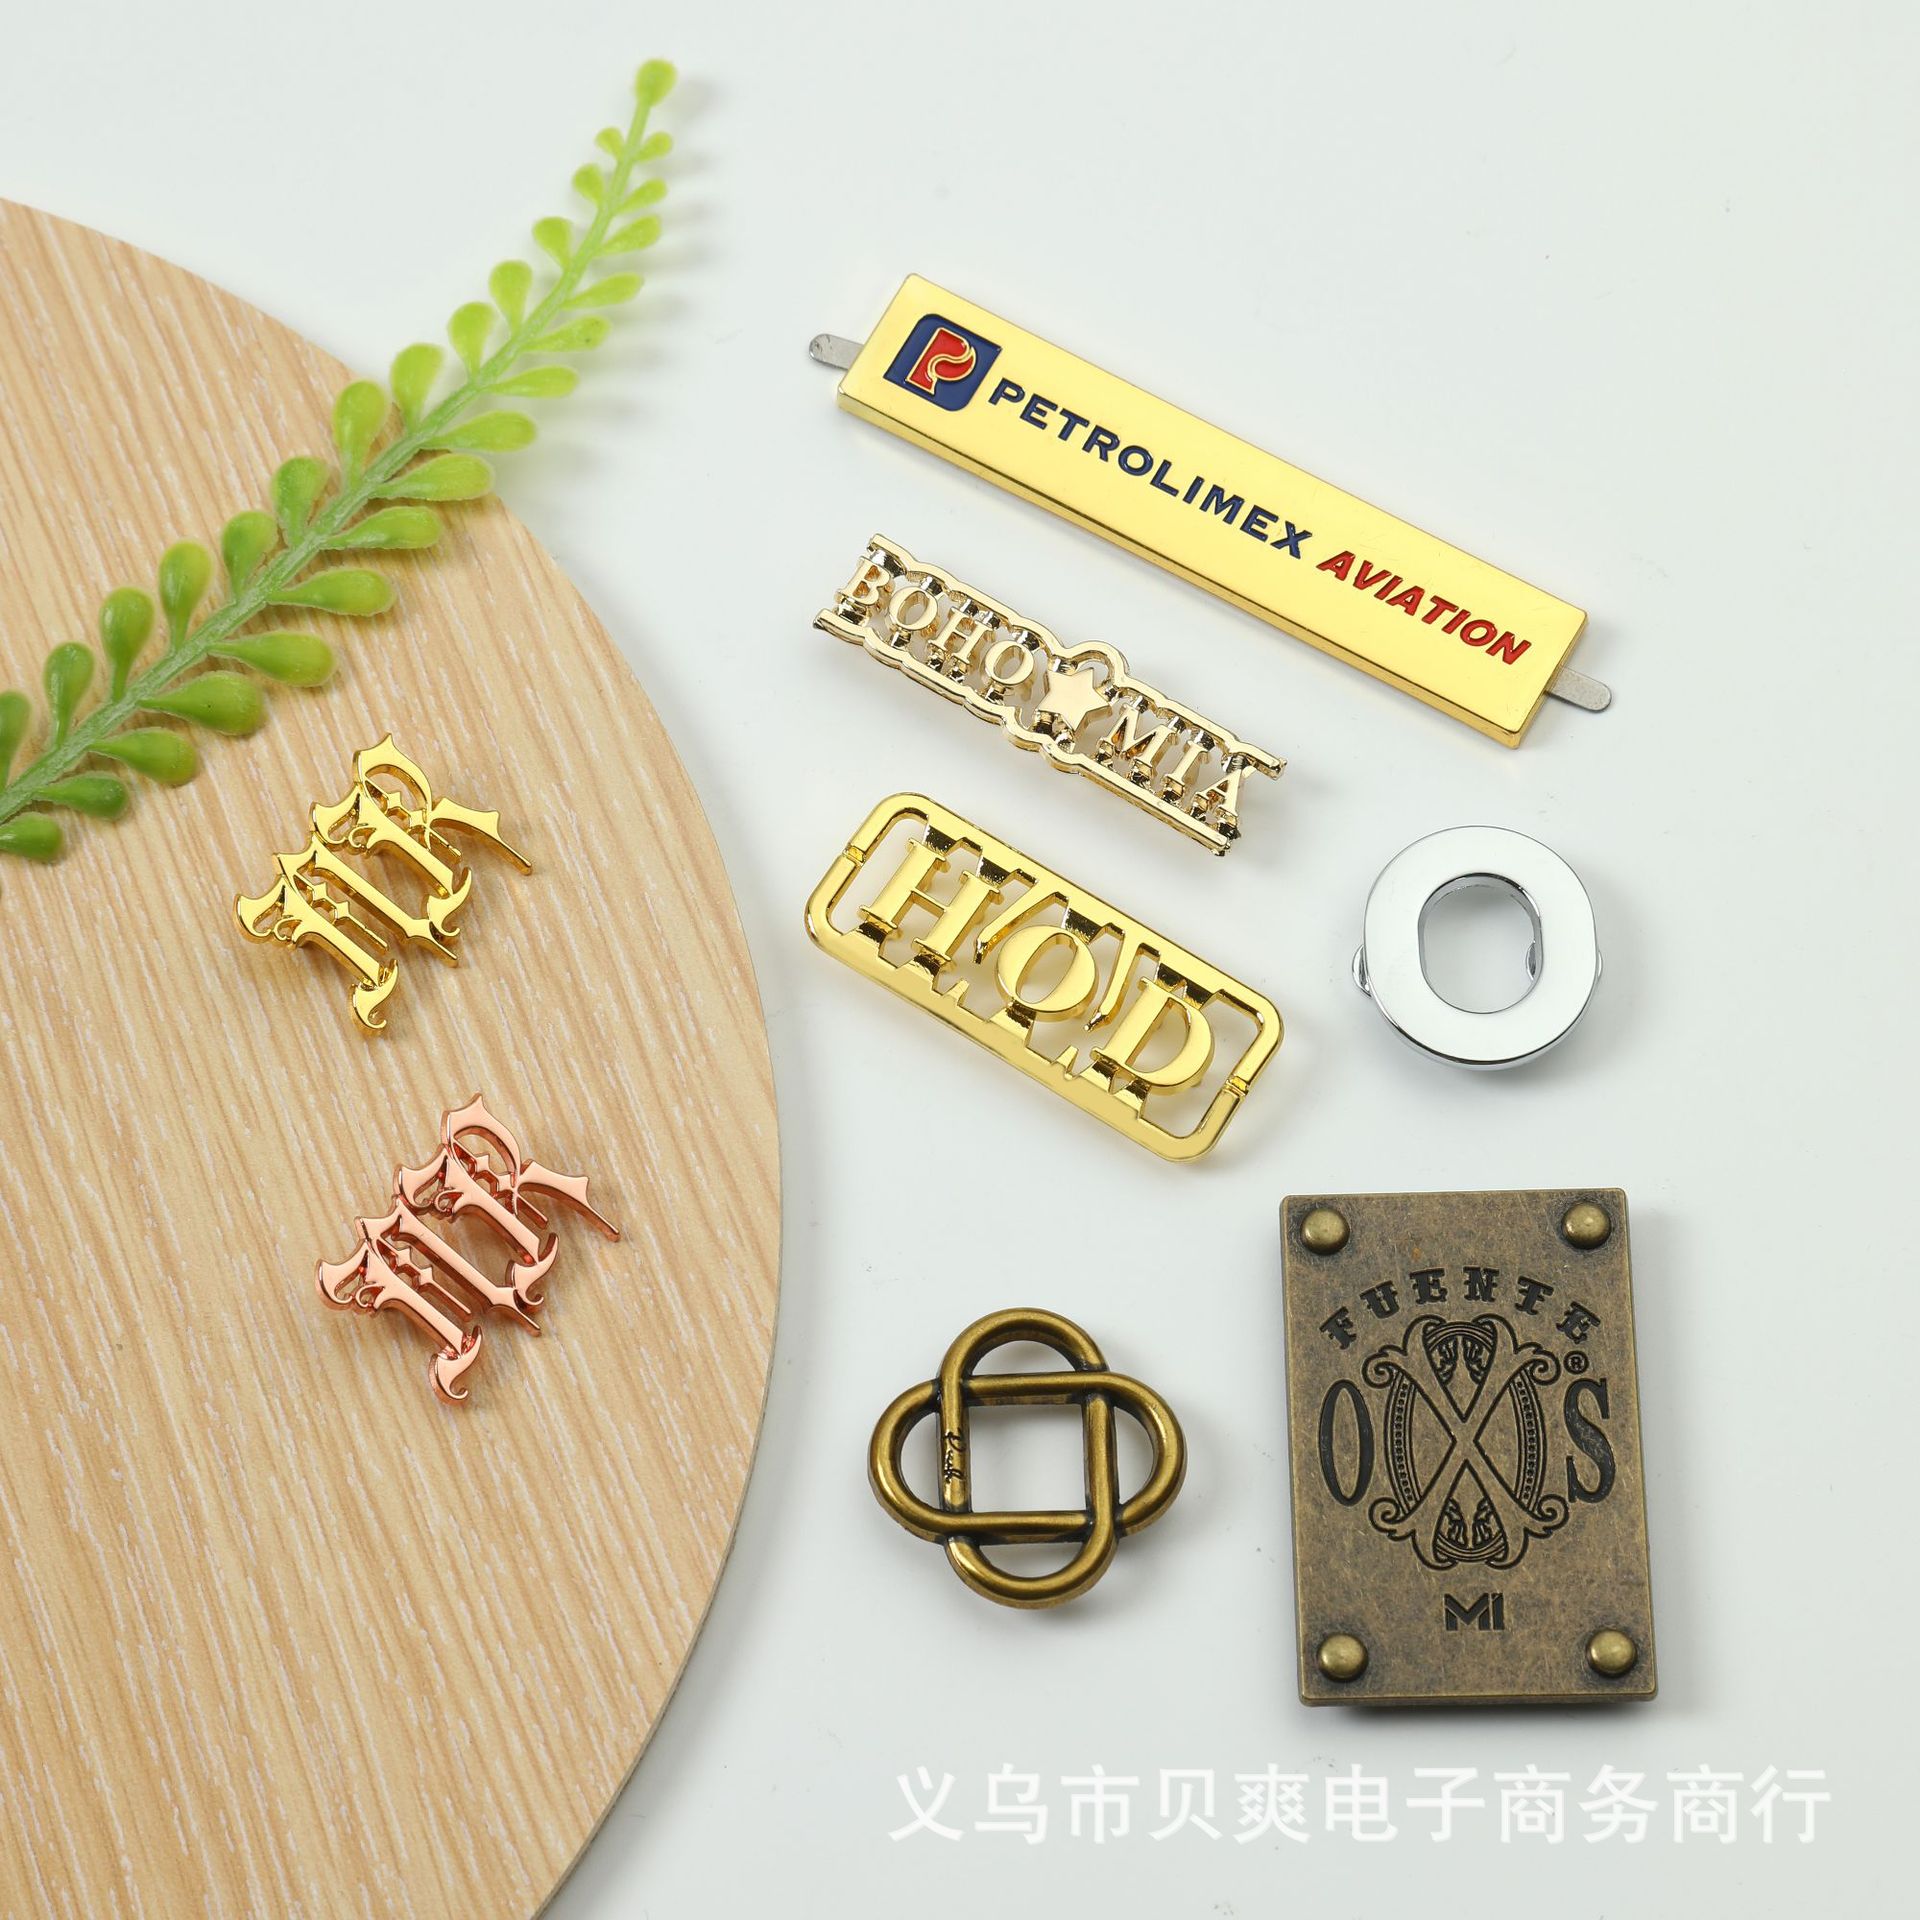 Die-Casting Zinc Alloy Pin Stitching Label Customizable Color Size Shape Hardware Trademark Logo Electroplating Laser